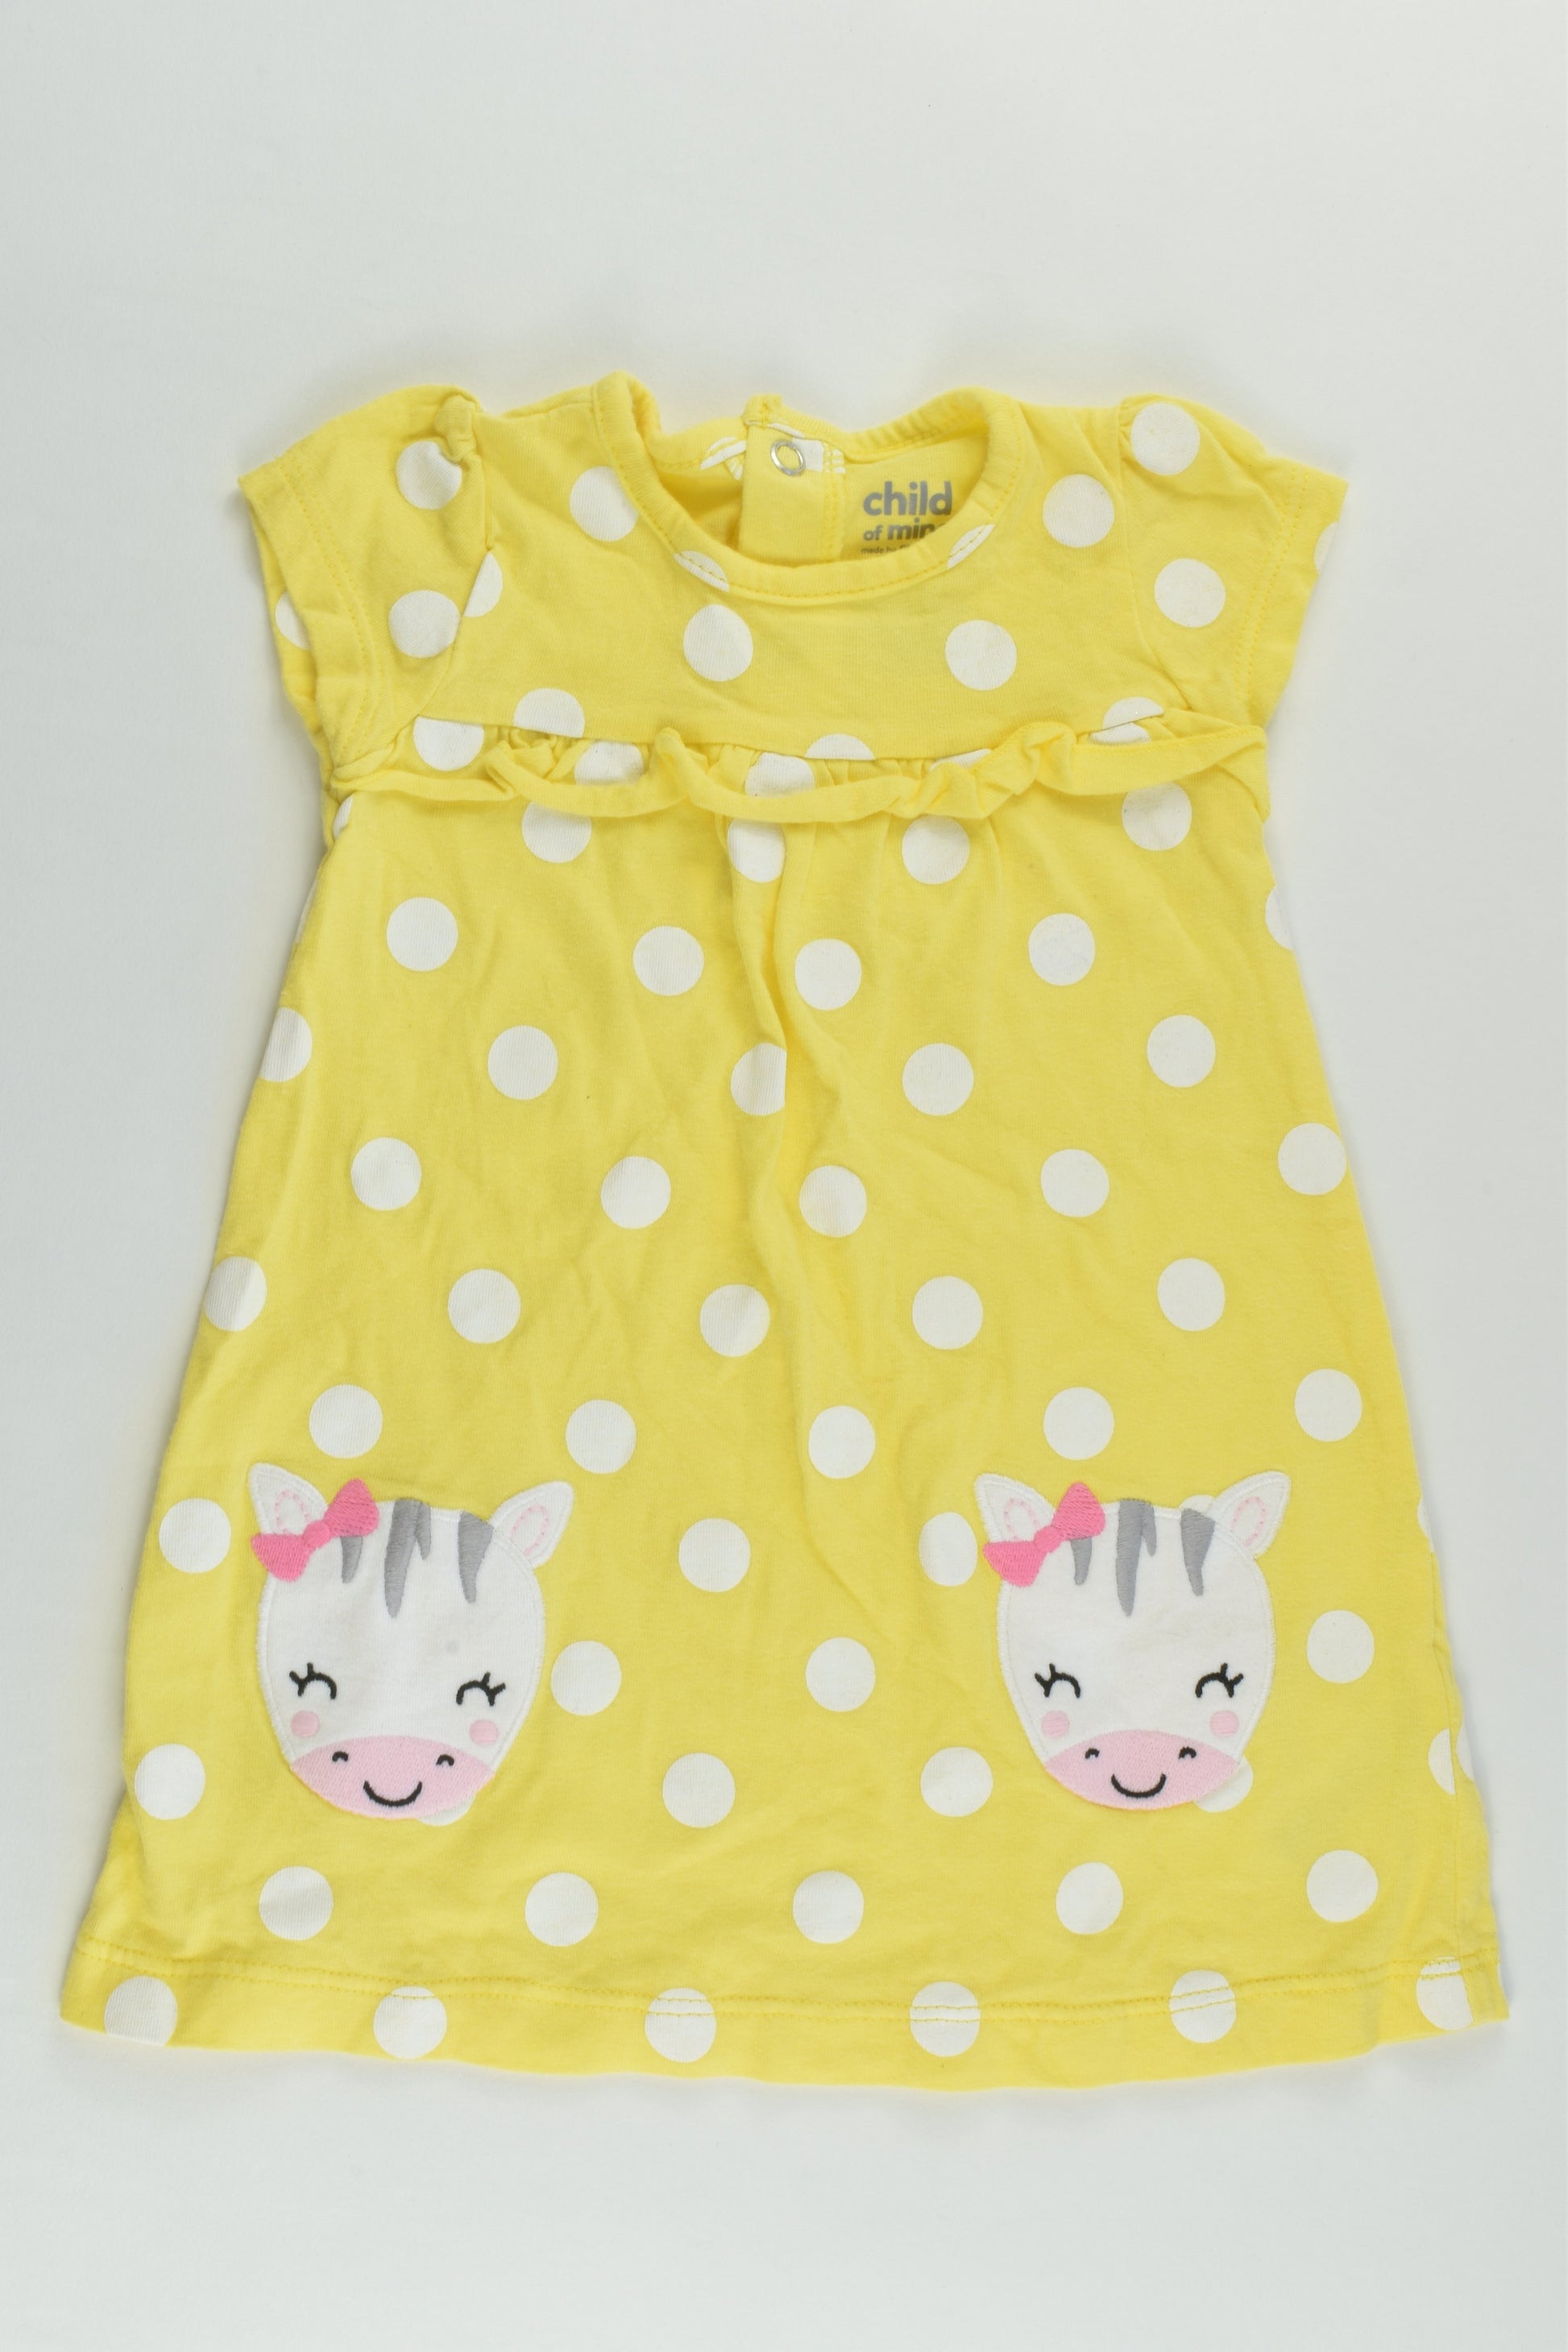 Child Of Mine by Carter's Size 0 (6-9 months) Polka Dots Dress/Tunic